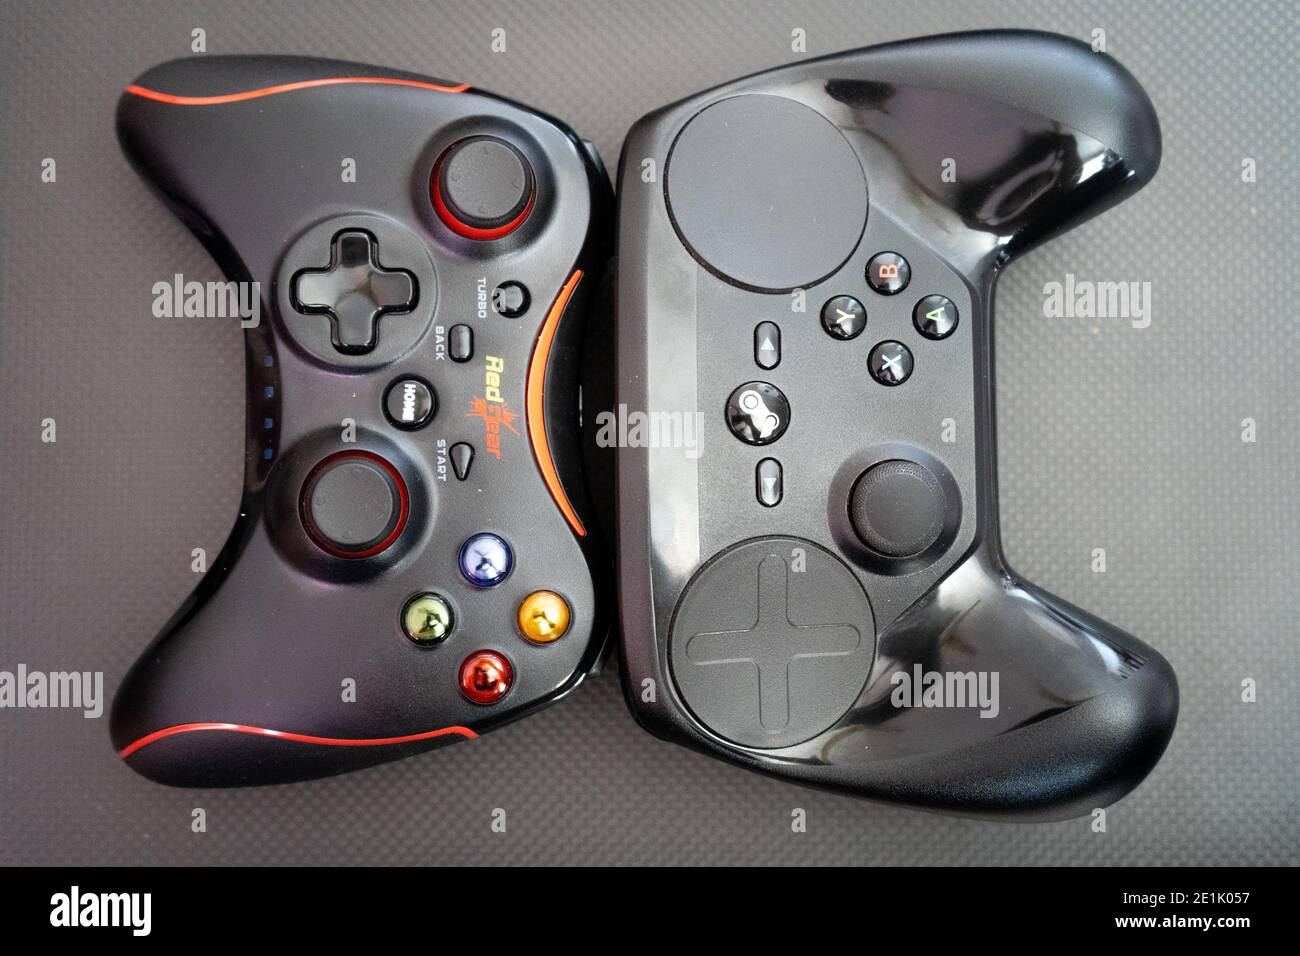 redgear vs the steam controller on a carbon fiber background showing  technology of inputs for computer gaming Stock Photo - Alamy